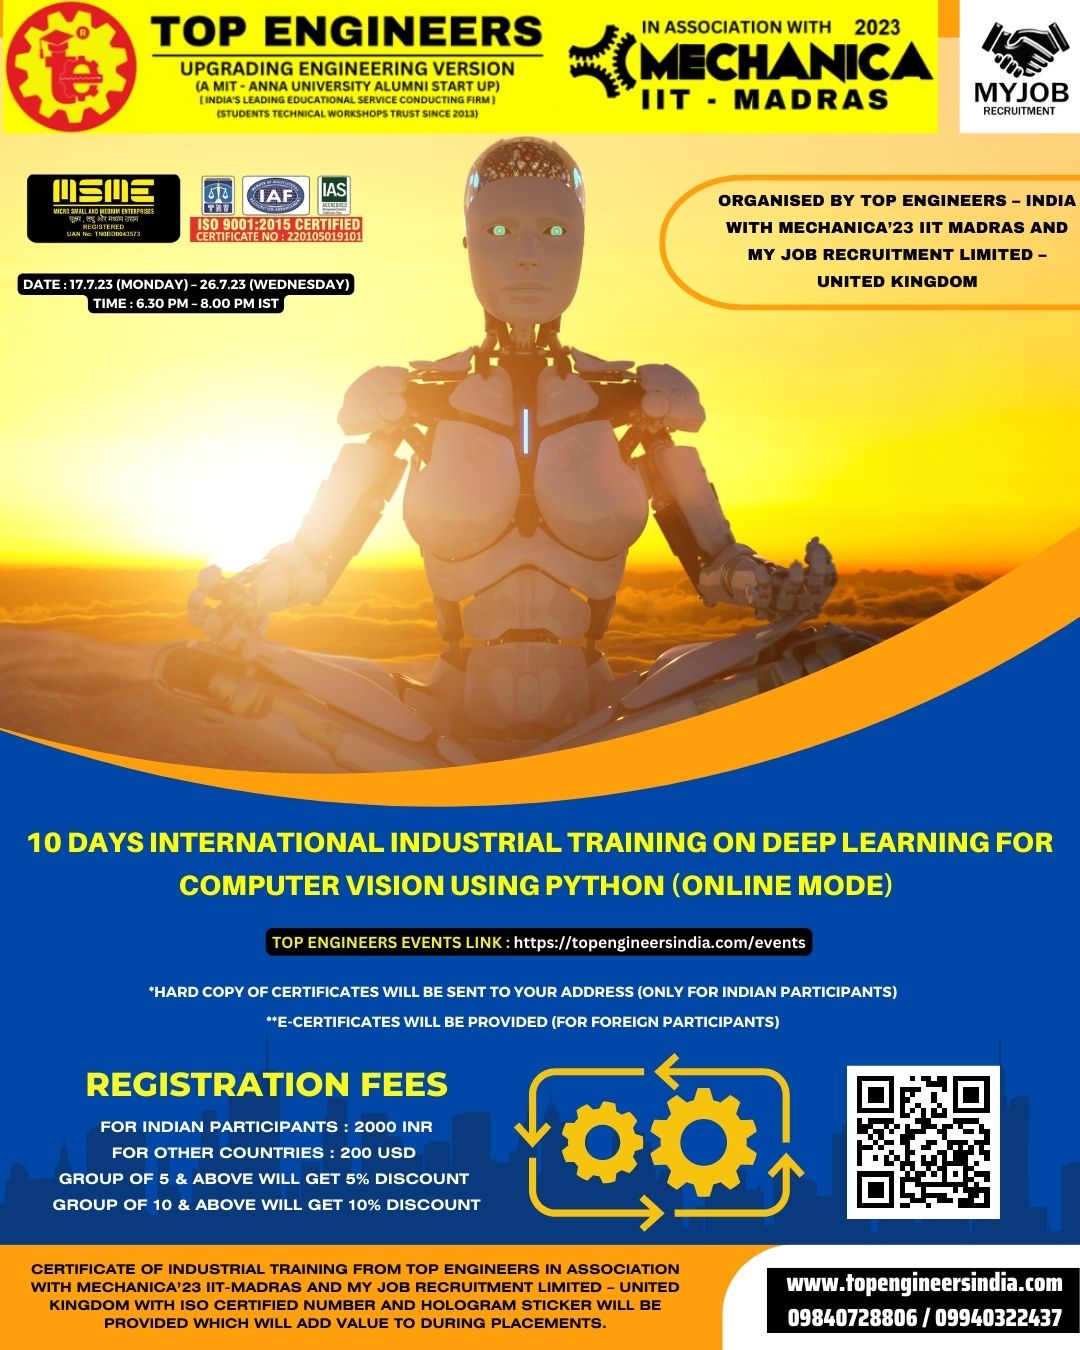 10 Days International Industrial Training on Deep Learning for Computer Vision using Python (online Mode) 2023